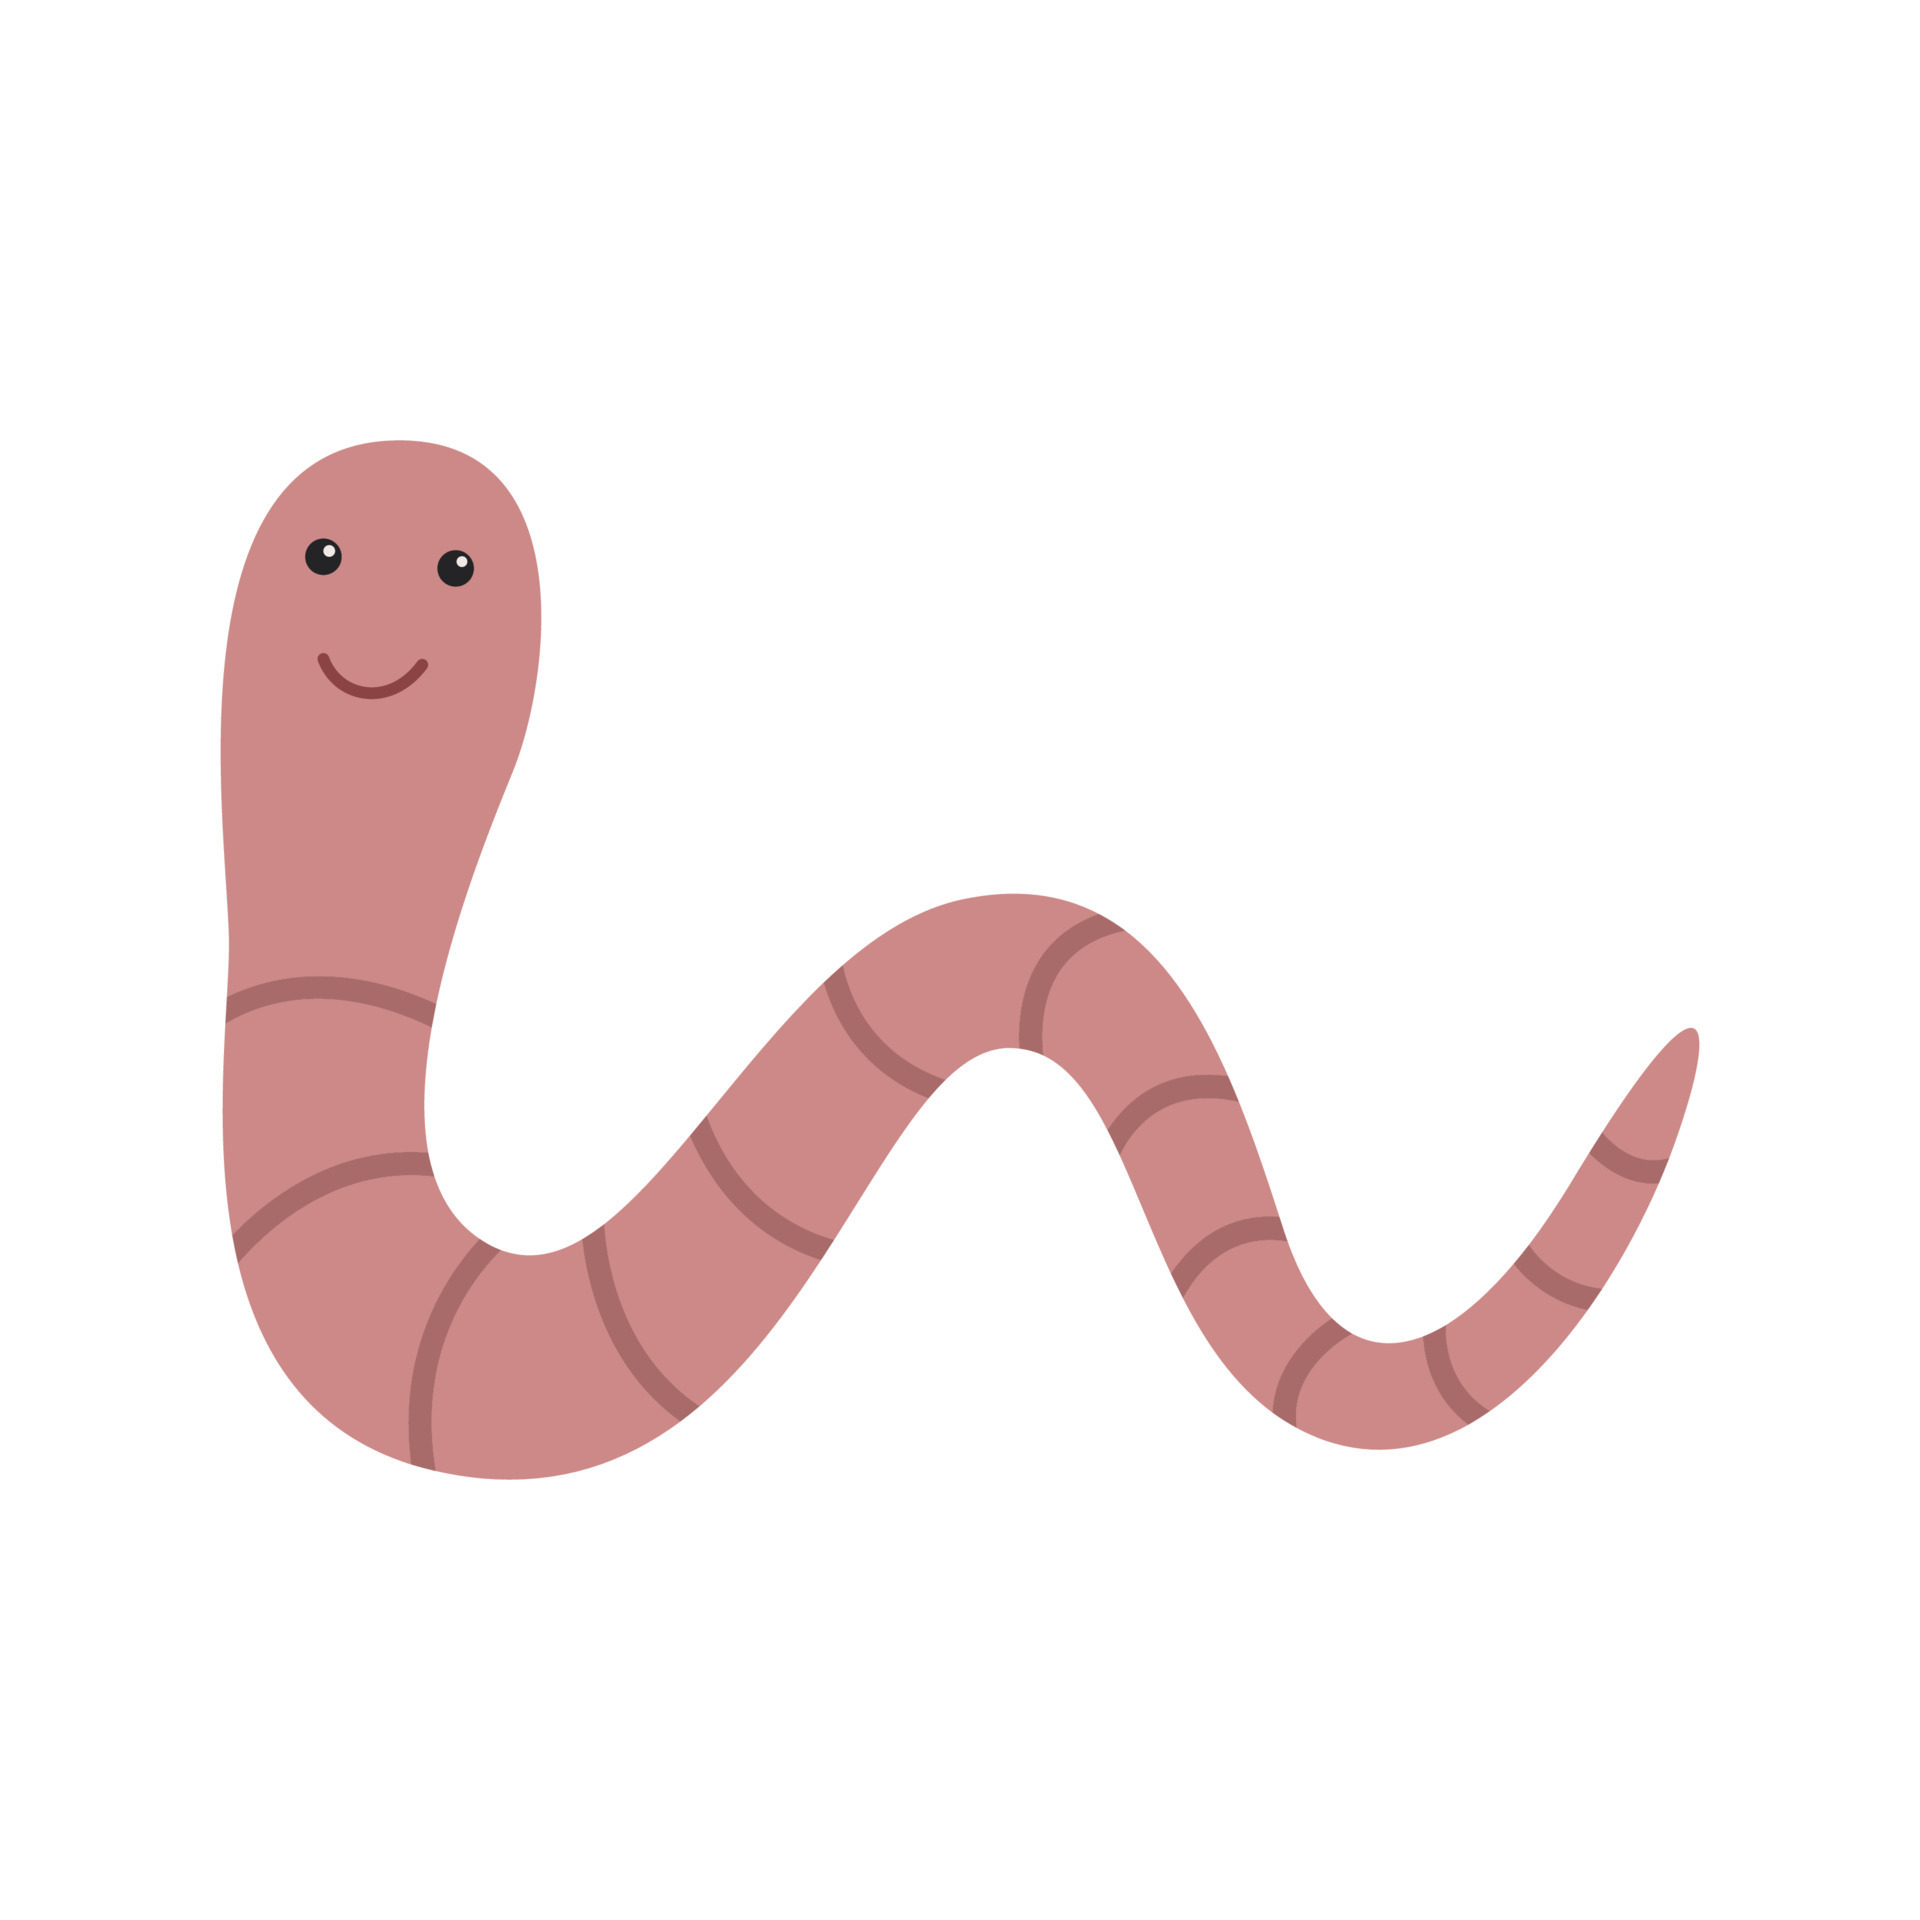 A cheerful cartoon worm with a smile, representing Wiggly Giggles: Worm Jokes